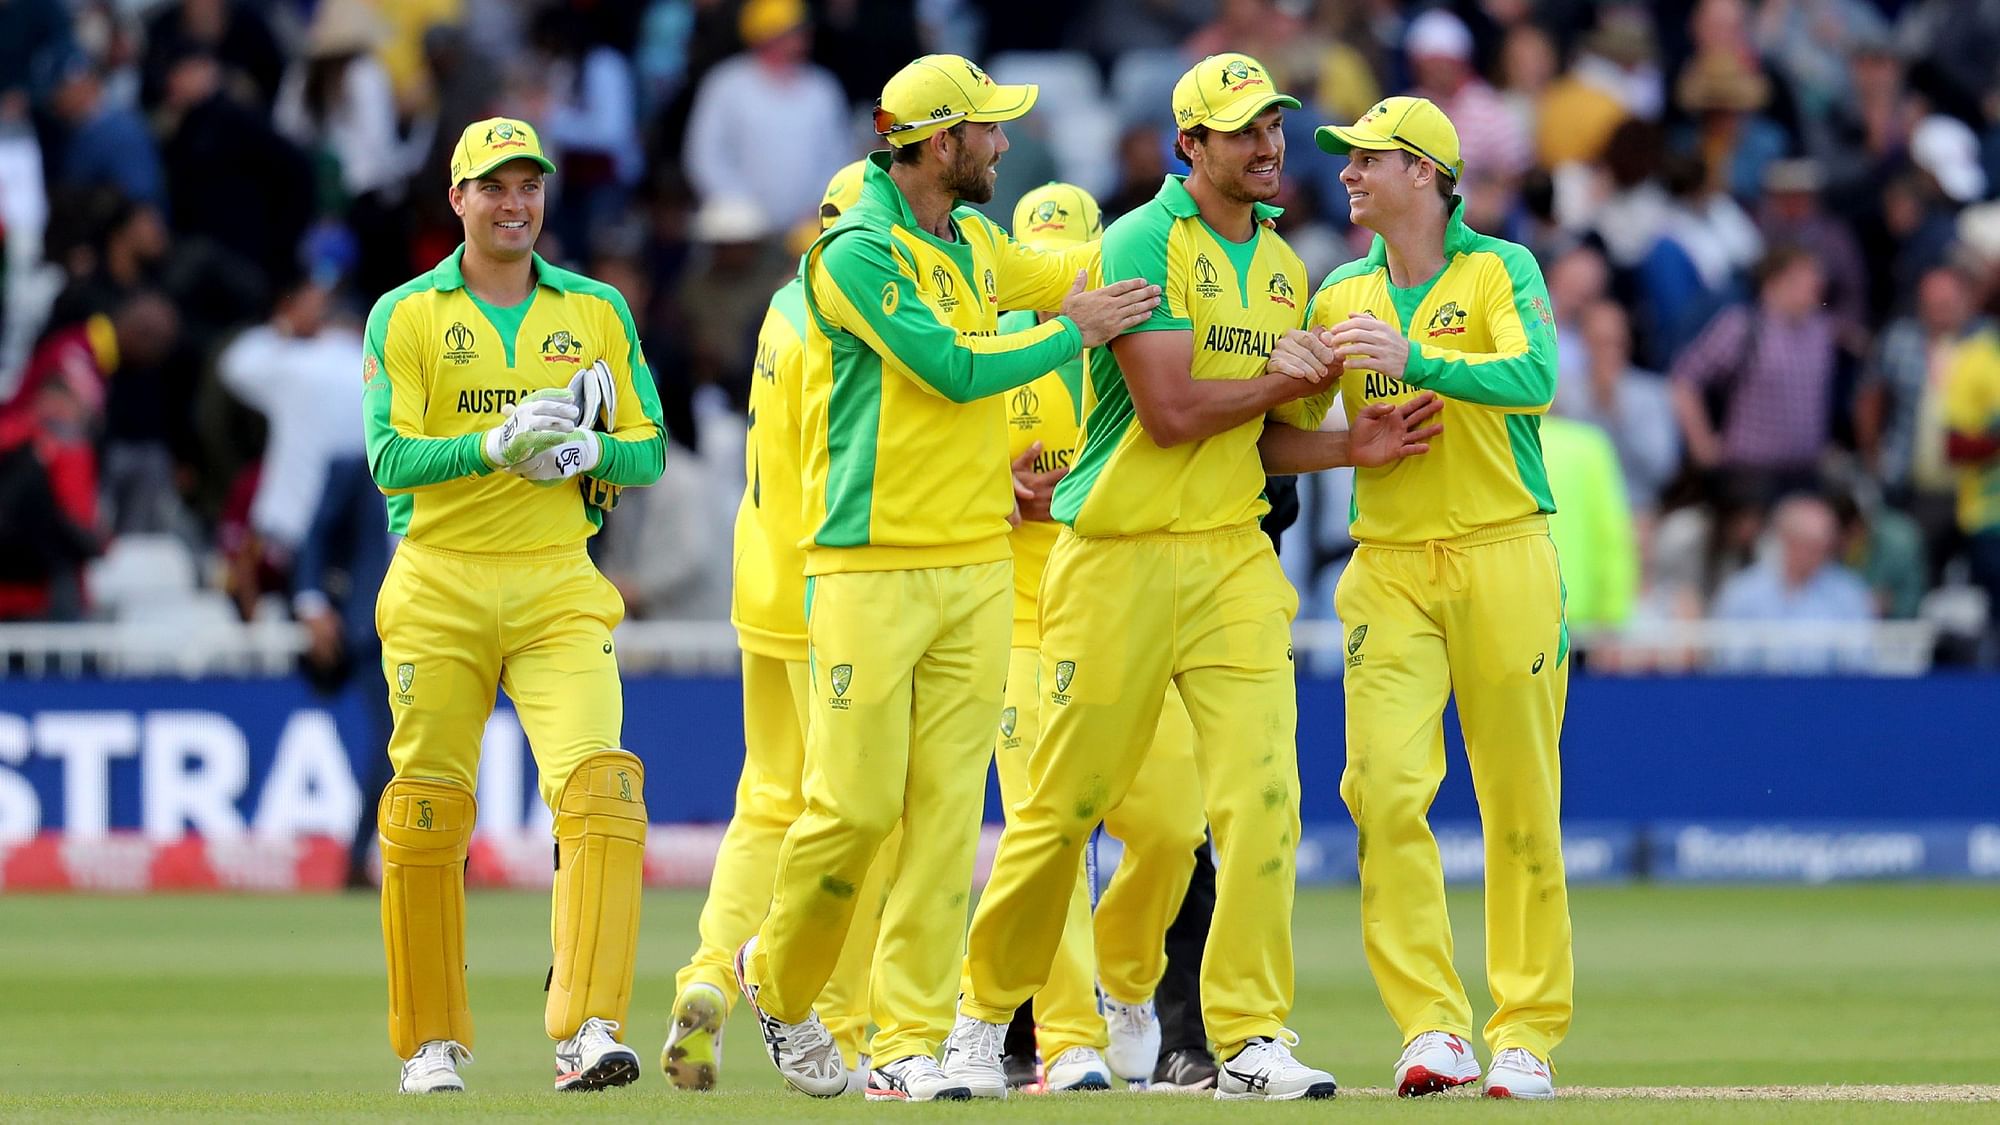 Australia thus notched up their second win in the tournament after defeating Afghanistan in their first match.